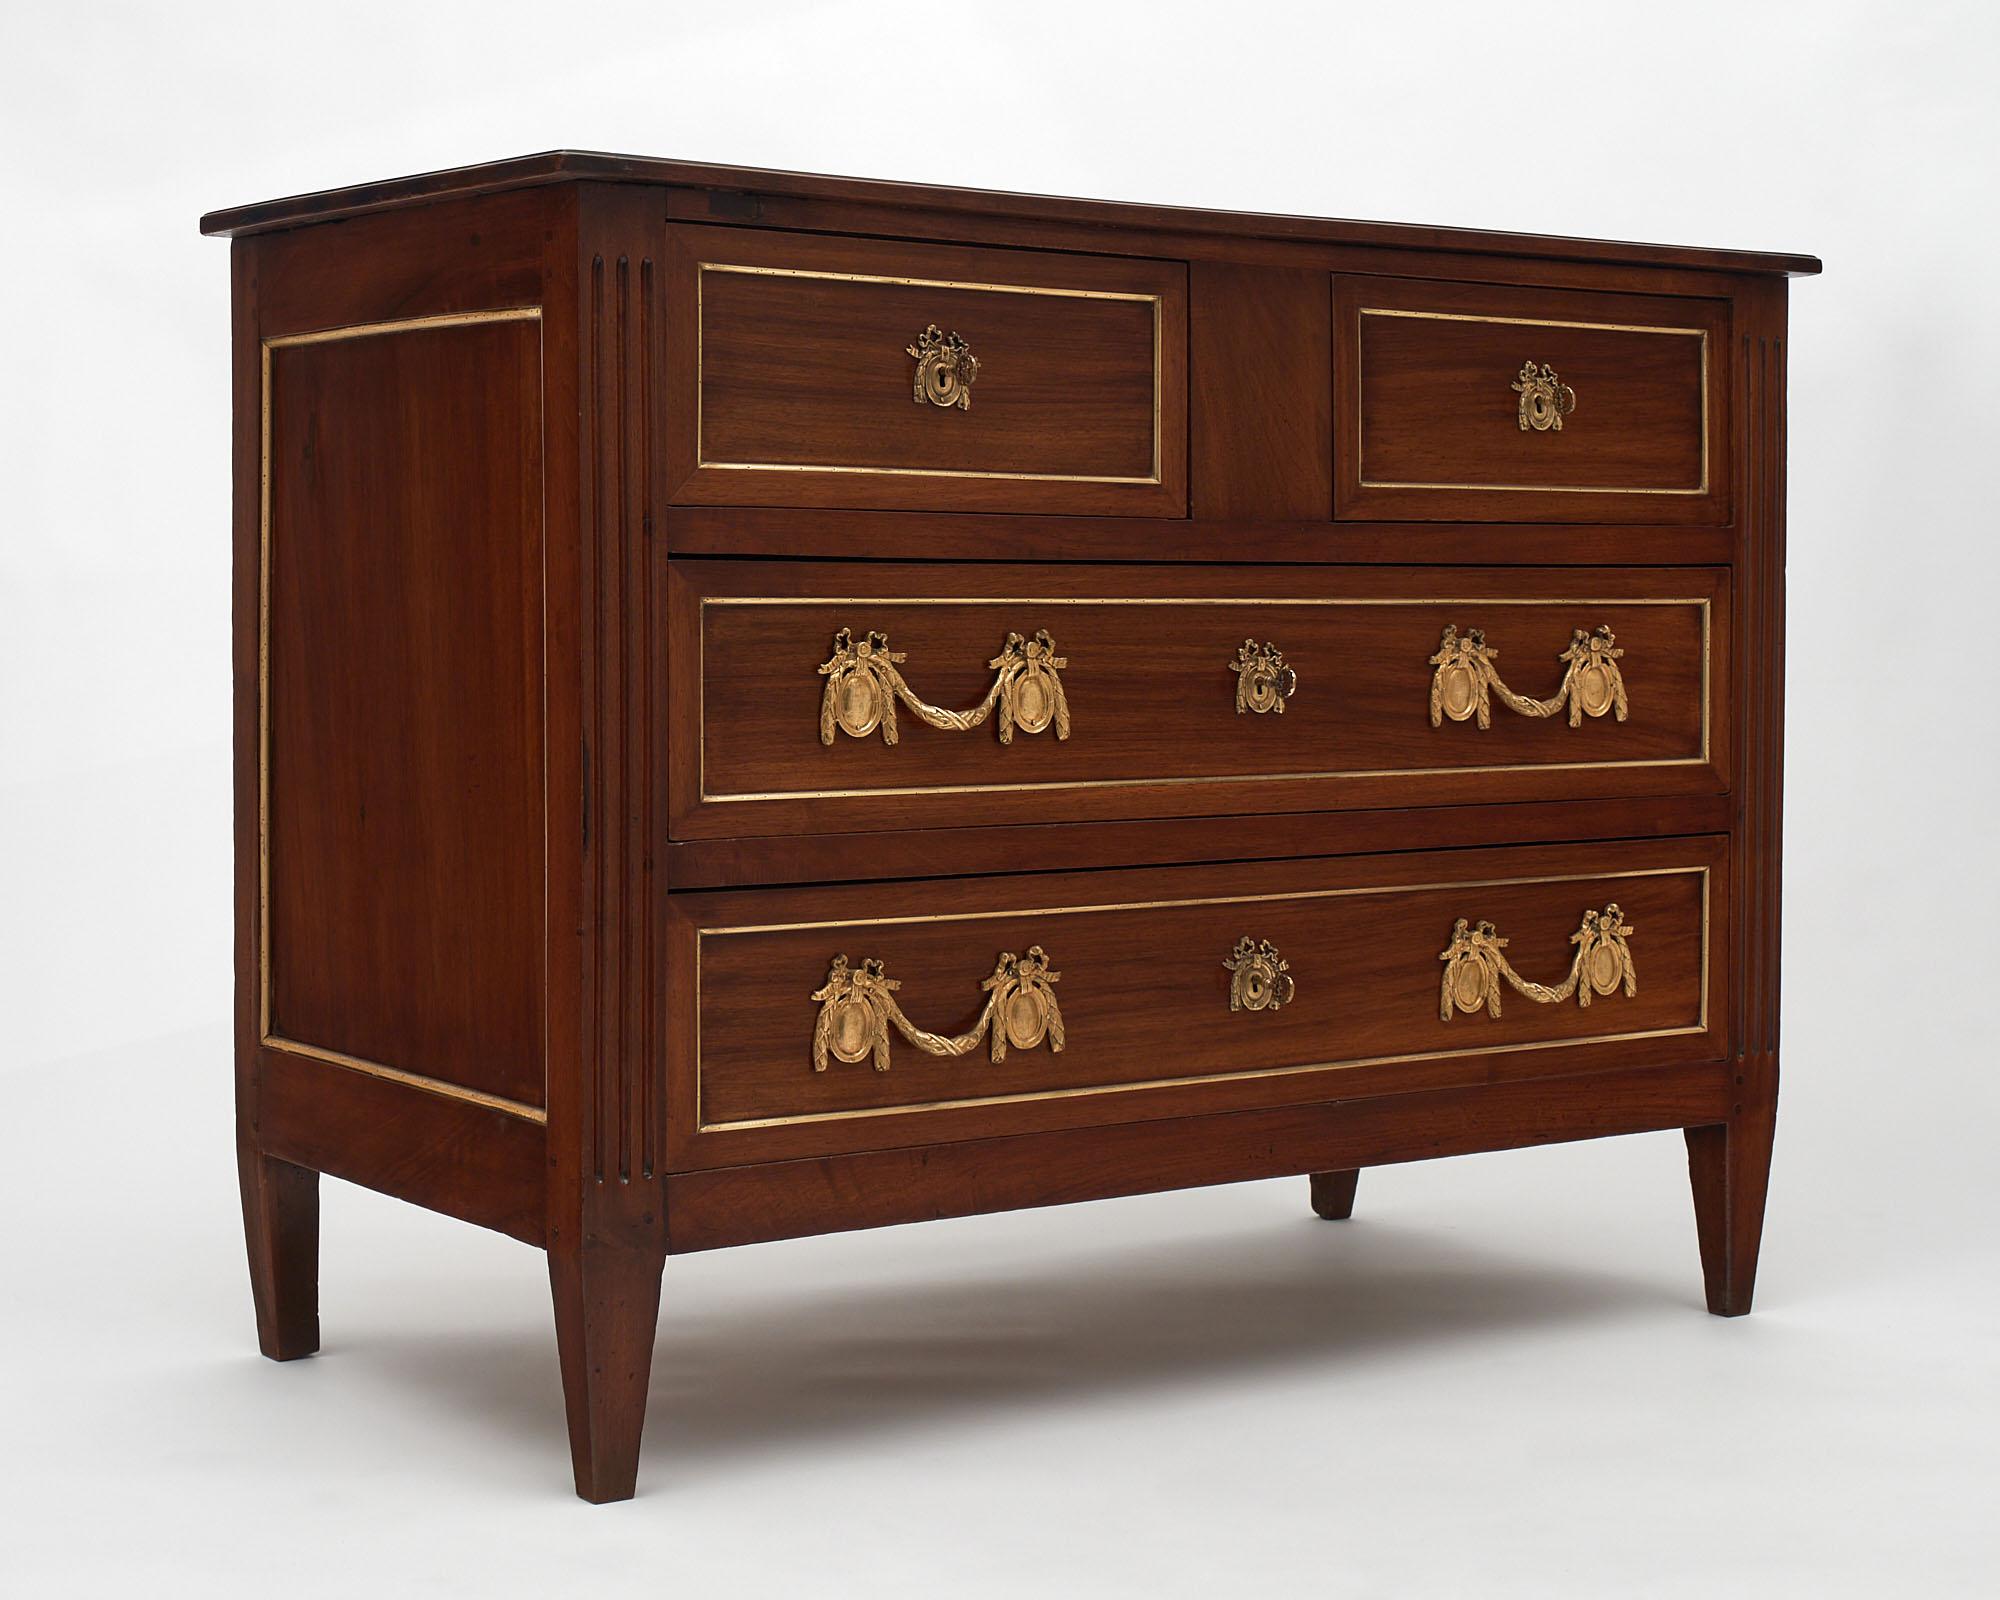 French Louis XVI style commode/chest. This piece is made of solid walnut and features tapered legs and wooden top. This classical chest boasts four dovetailed drawers and is adorned with finely gilded bronzes and gilt trims throughout.